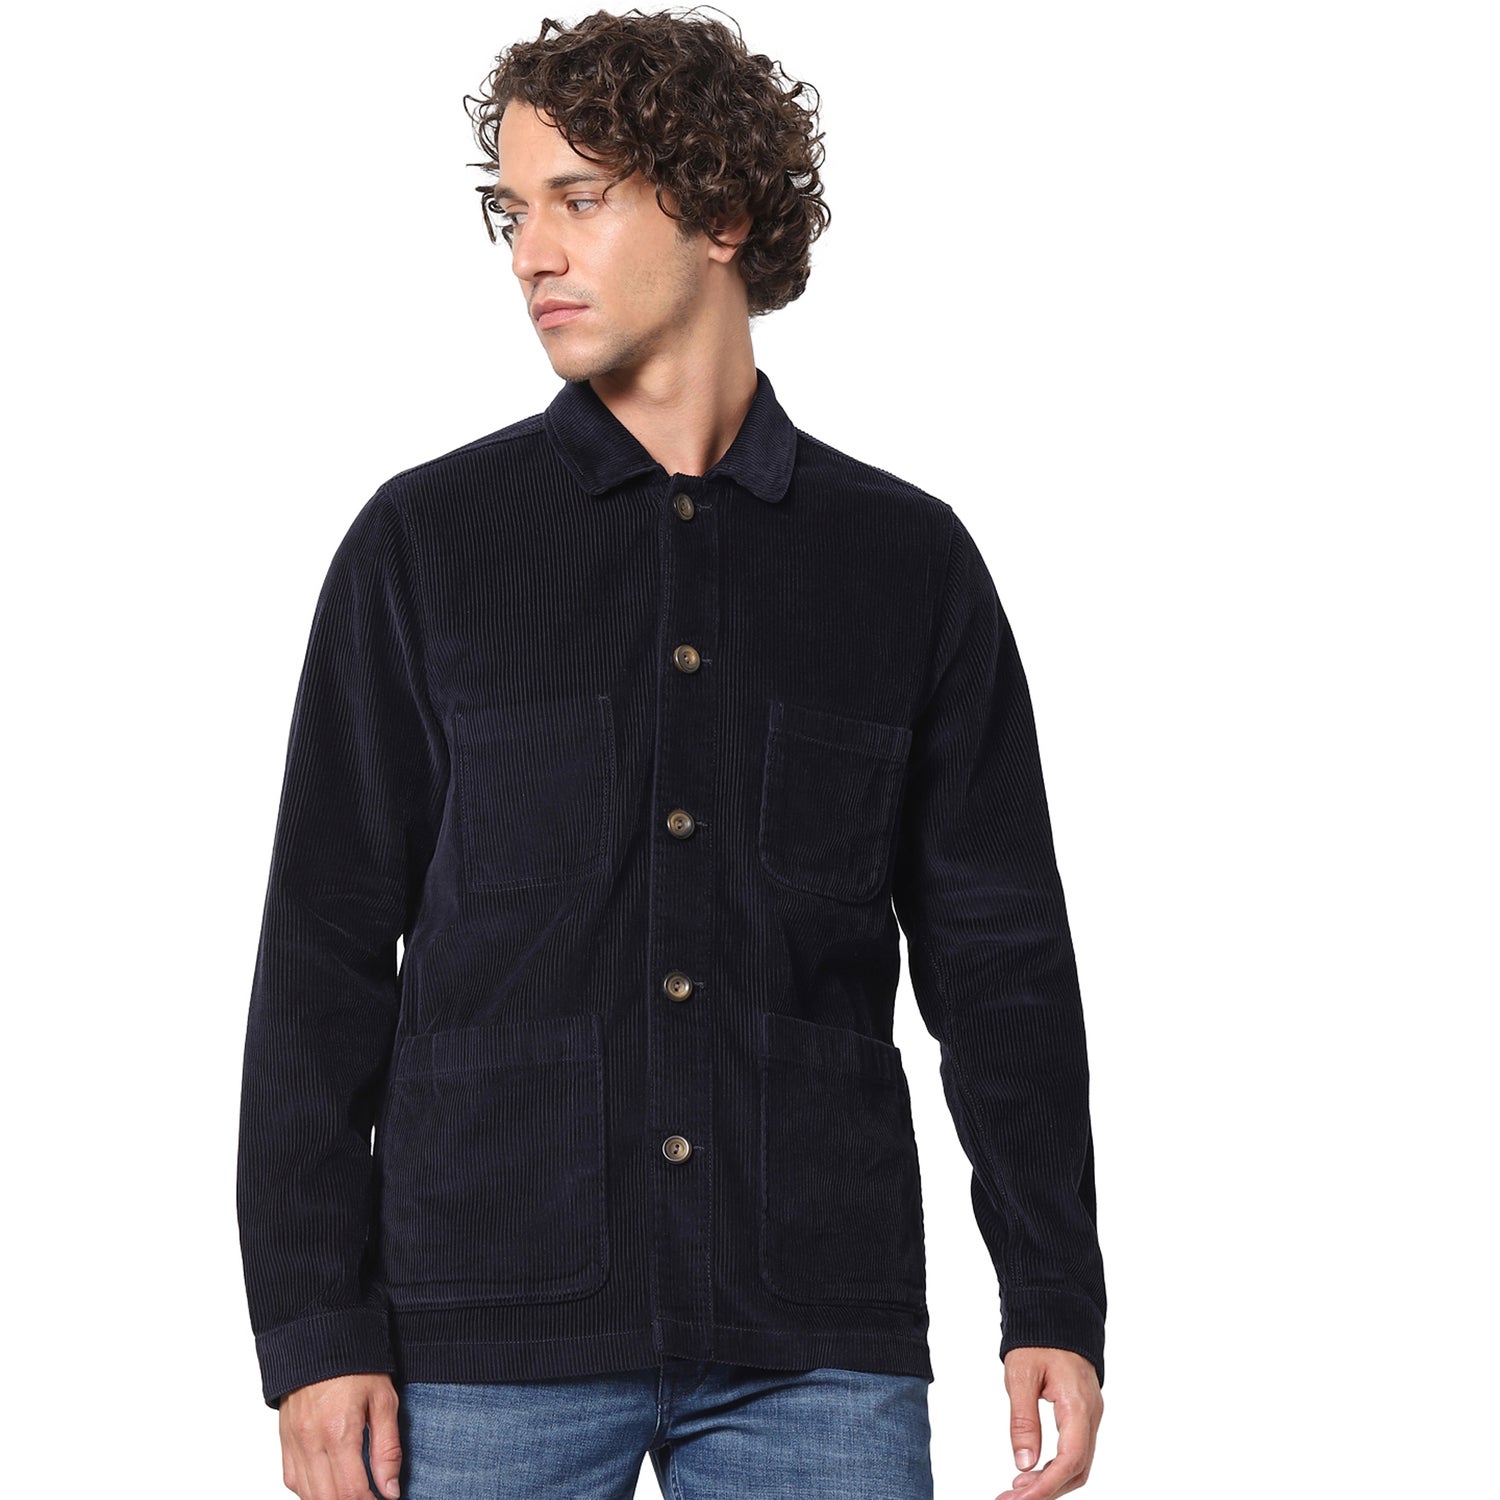 Navy Blue Solid Cotton Long Sleeves Tailored Jacket (VUMUSEVEL)